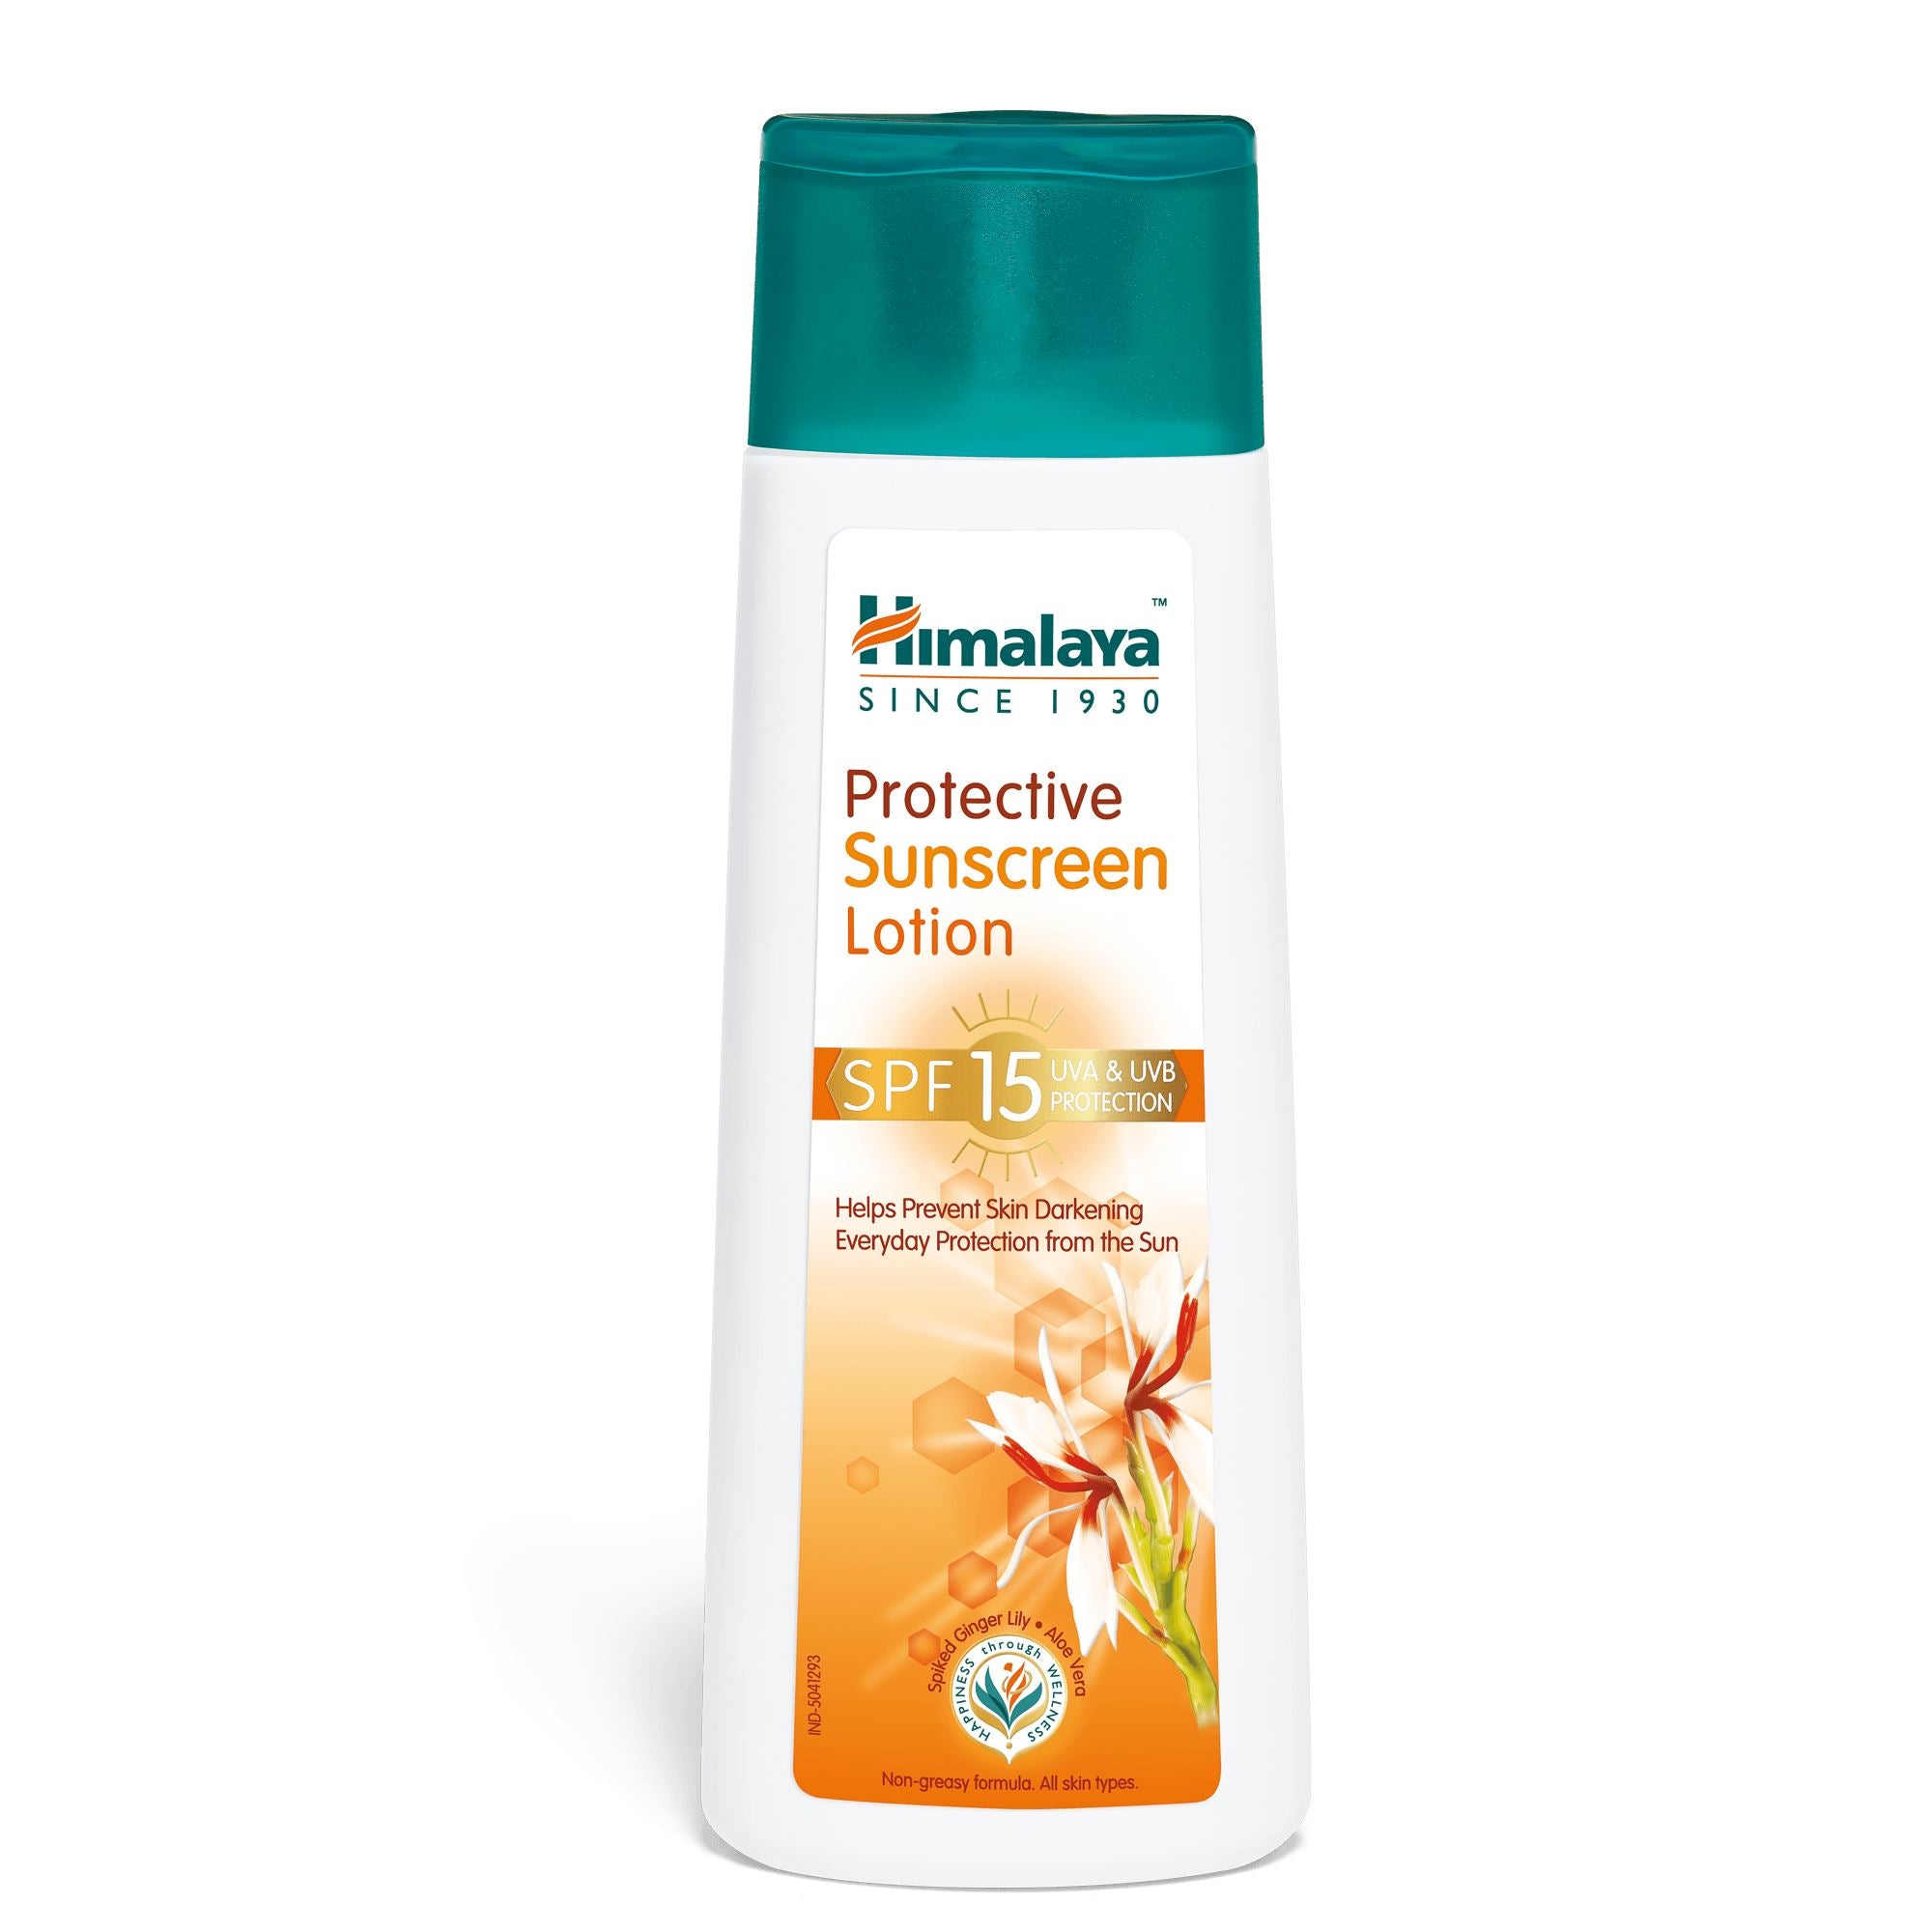 Himalaya Protective Sunscreen Lotion 100ml - Everyday protection from the sun